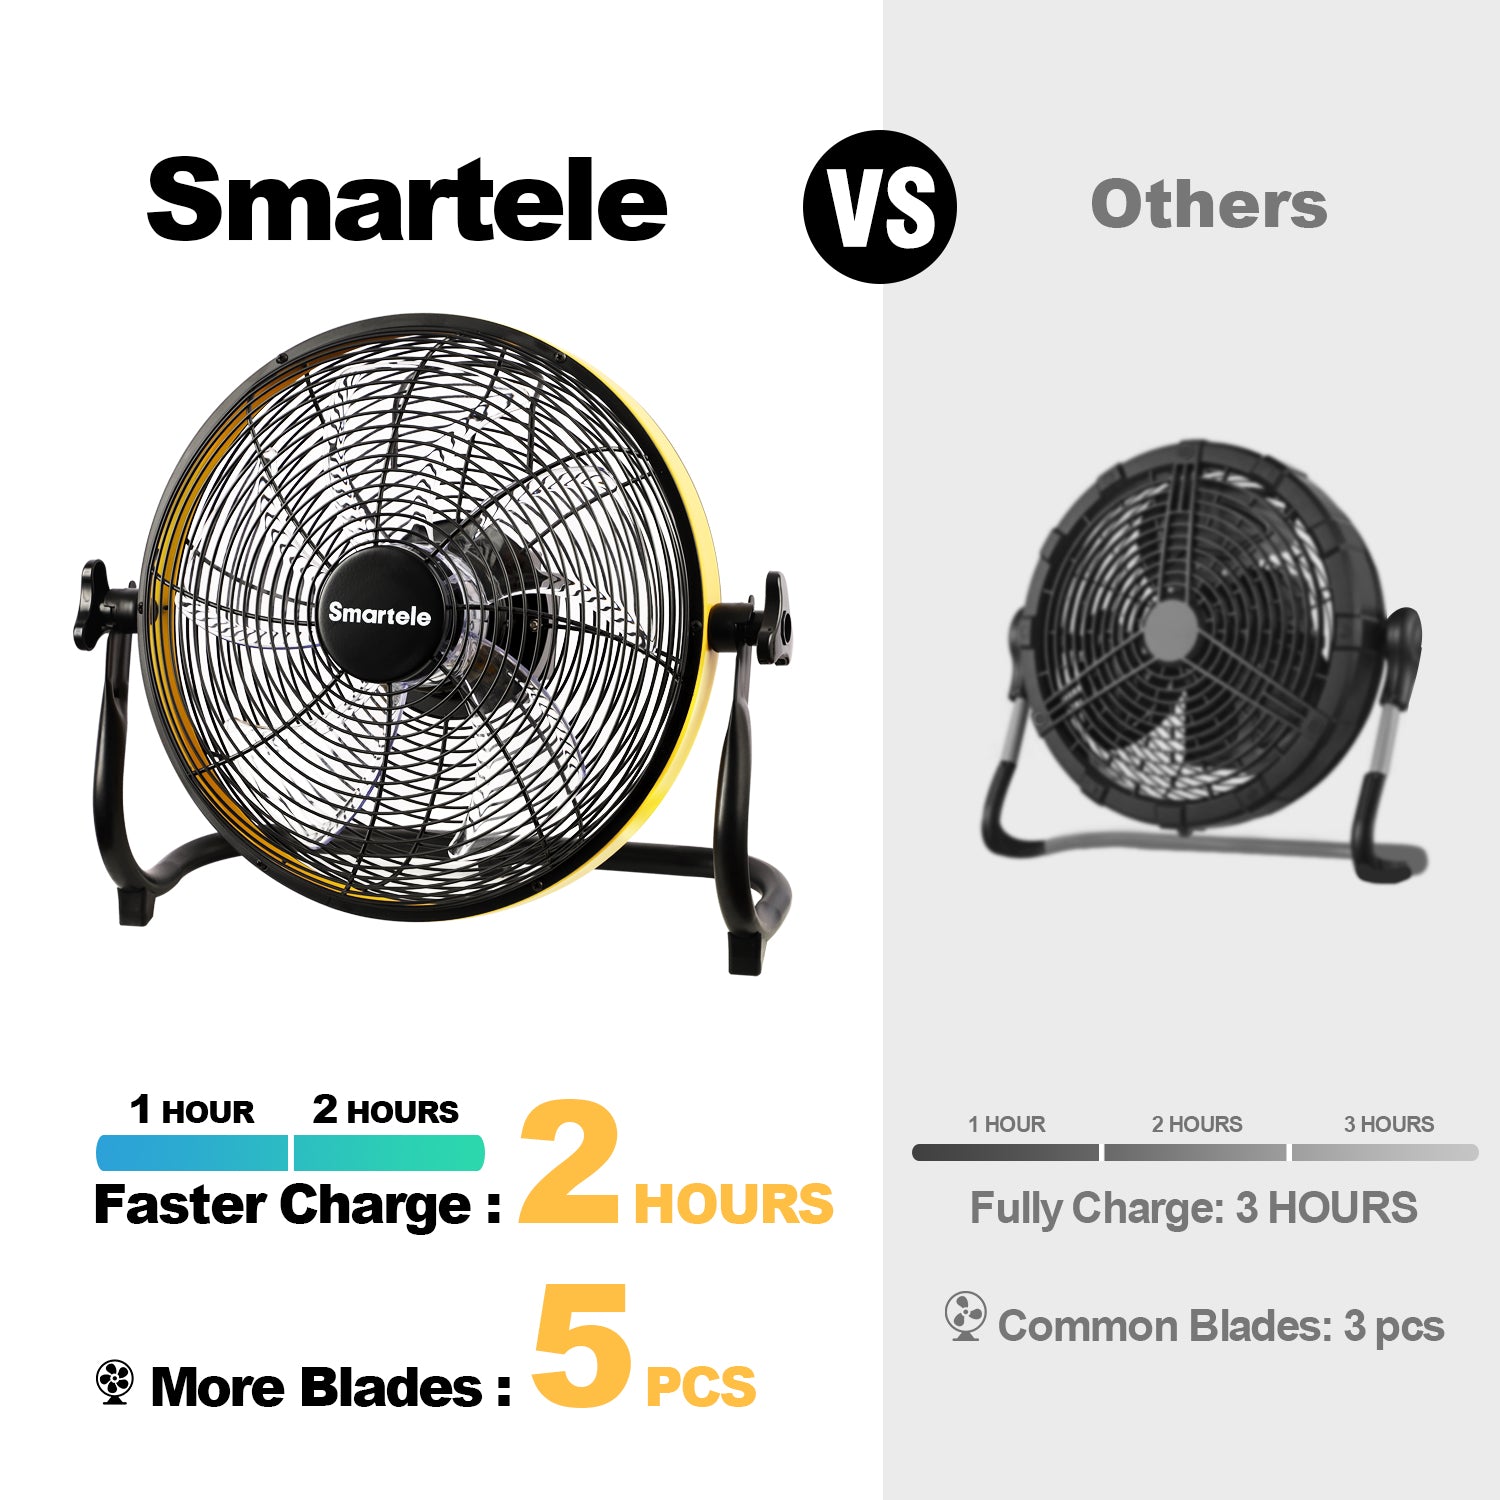 This outdoor fan with built-in 15000mAh rechargeable battery